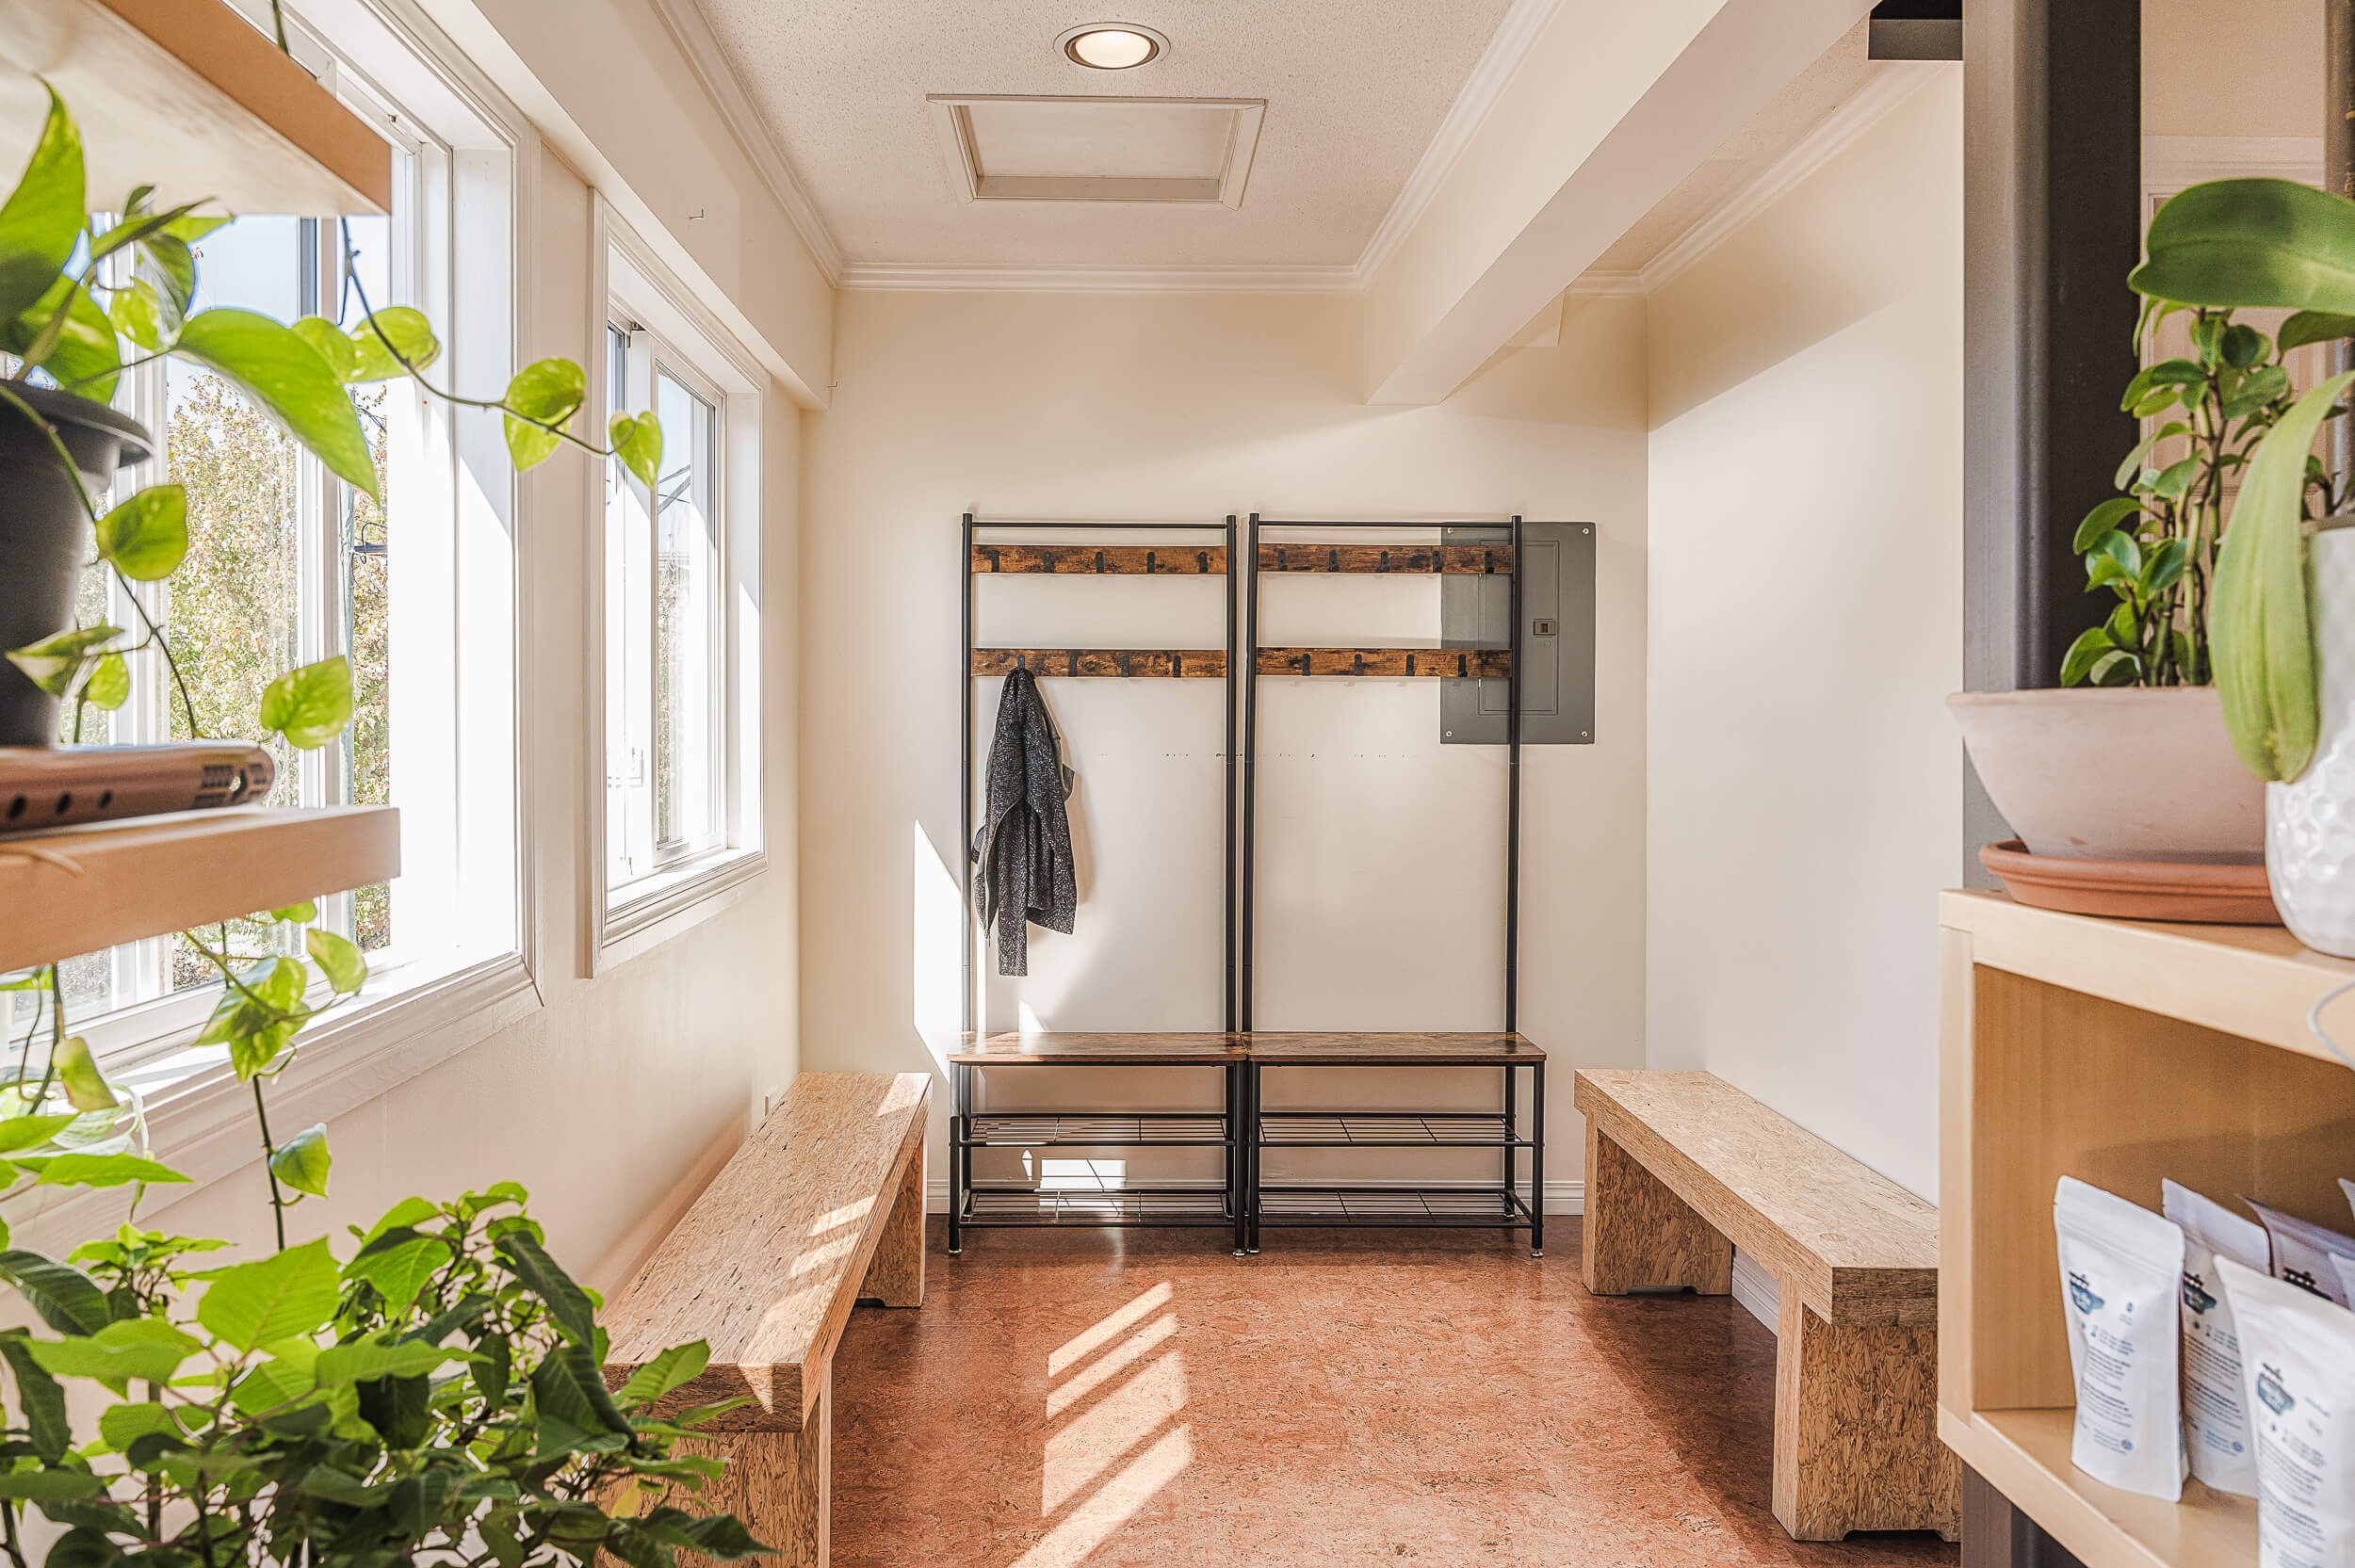 Sunlit entrance of Shala Yoga studio in Squamish featuring natural wood benches, a plant-filled shelf, and a rack with yoga accessories. The welcoming atmosphere is enhanced by the warm glow through large windows, creating a serene space for yogis to gather before class.